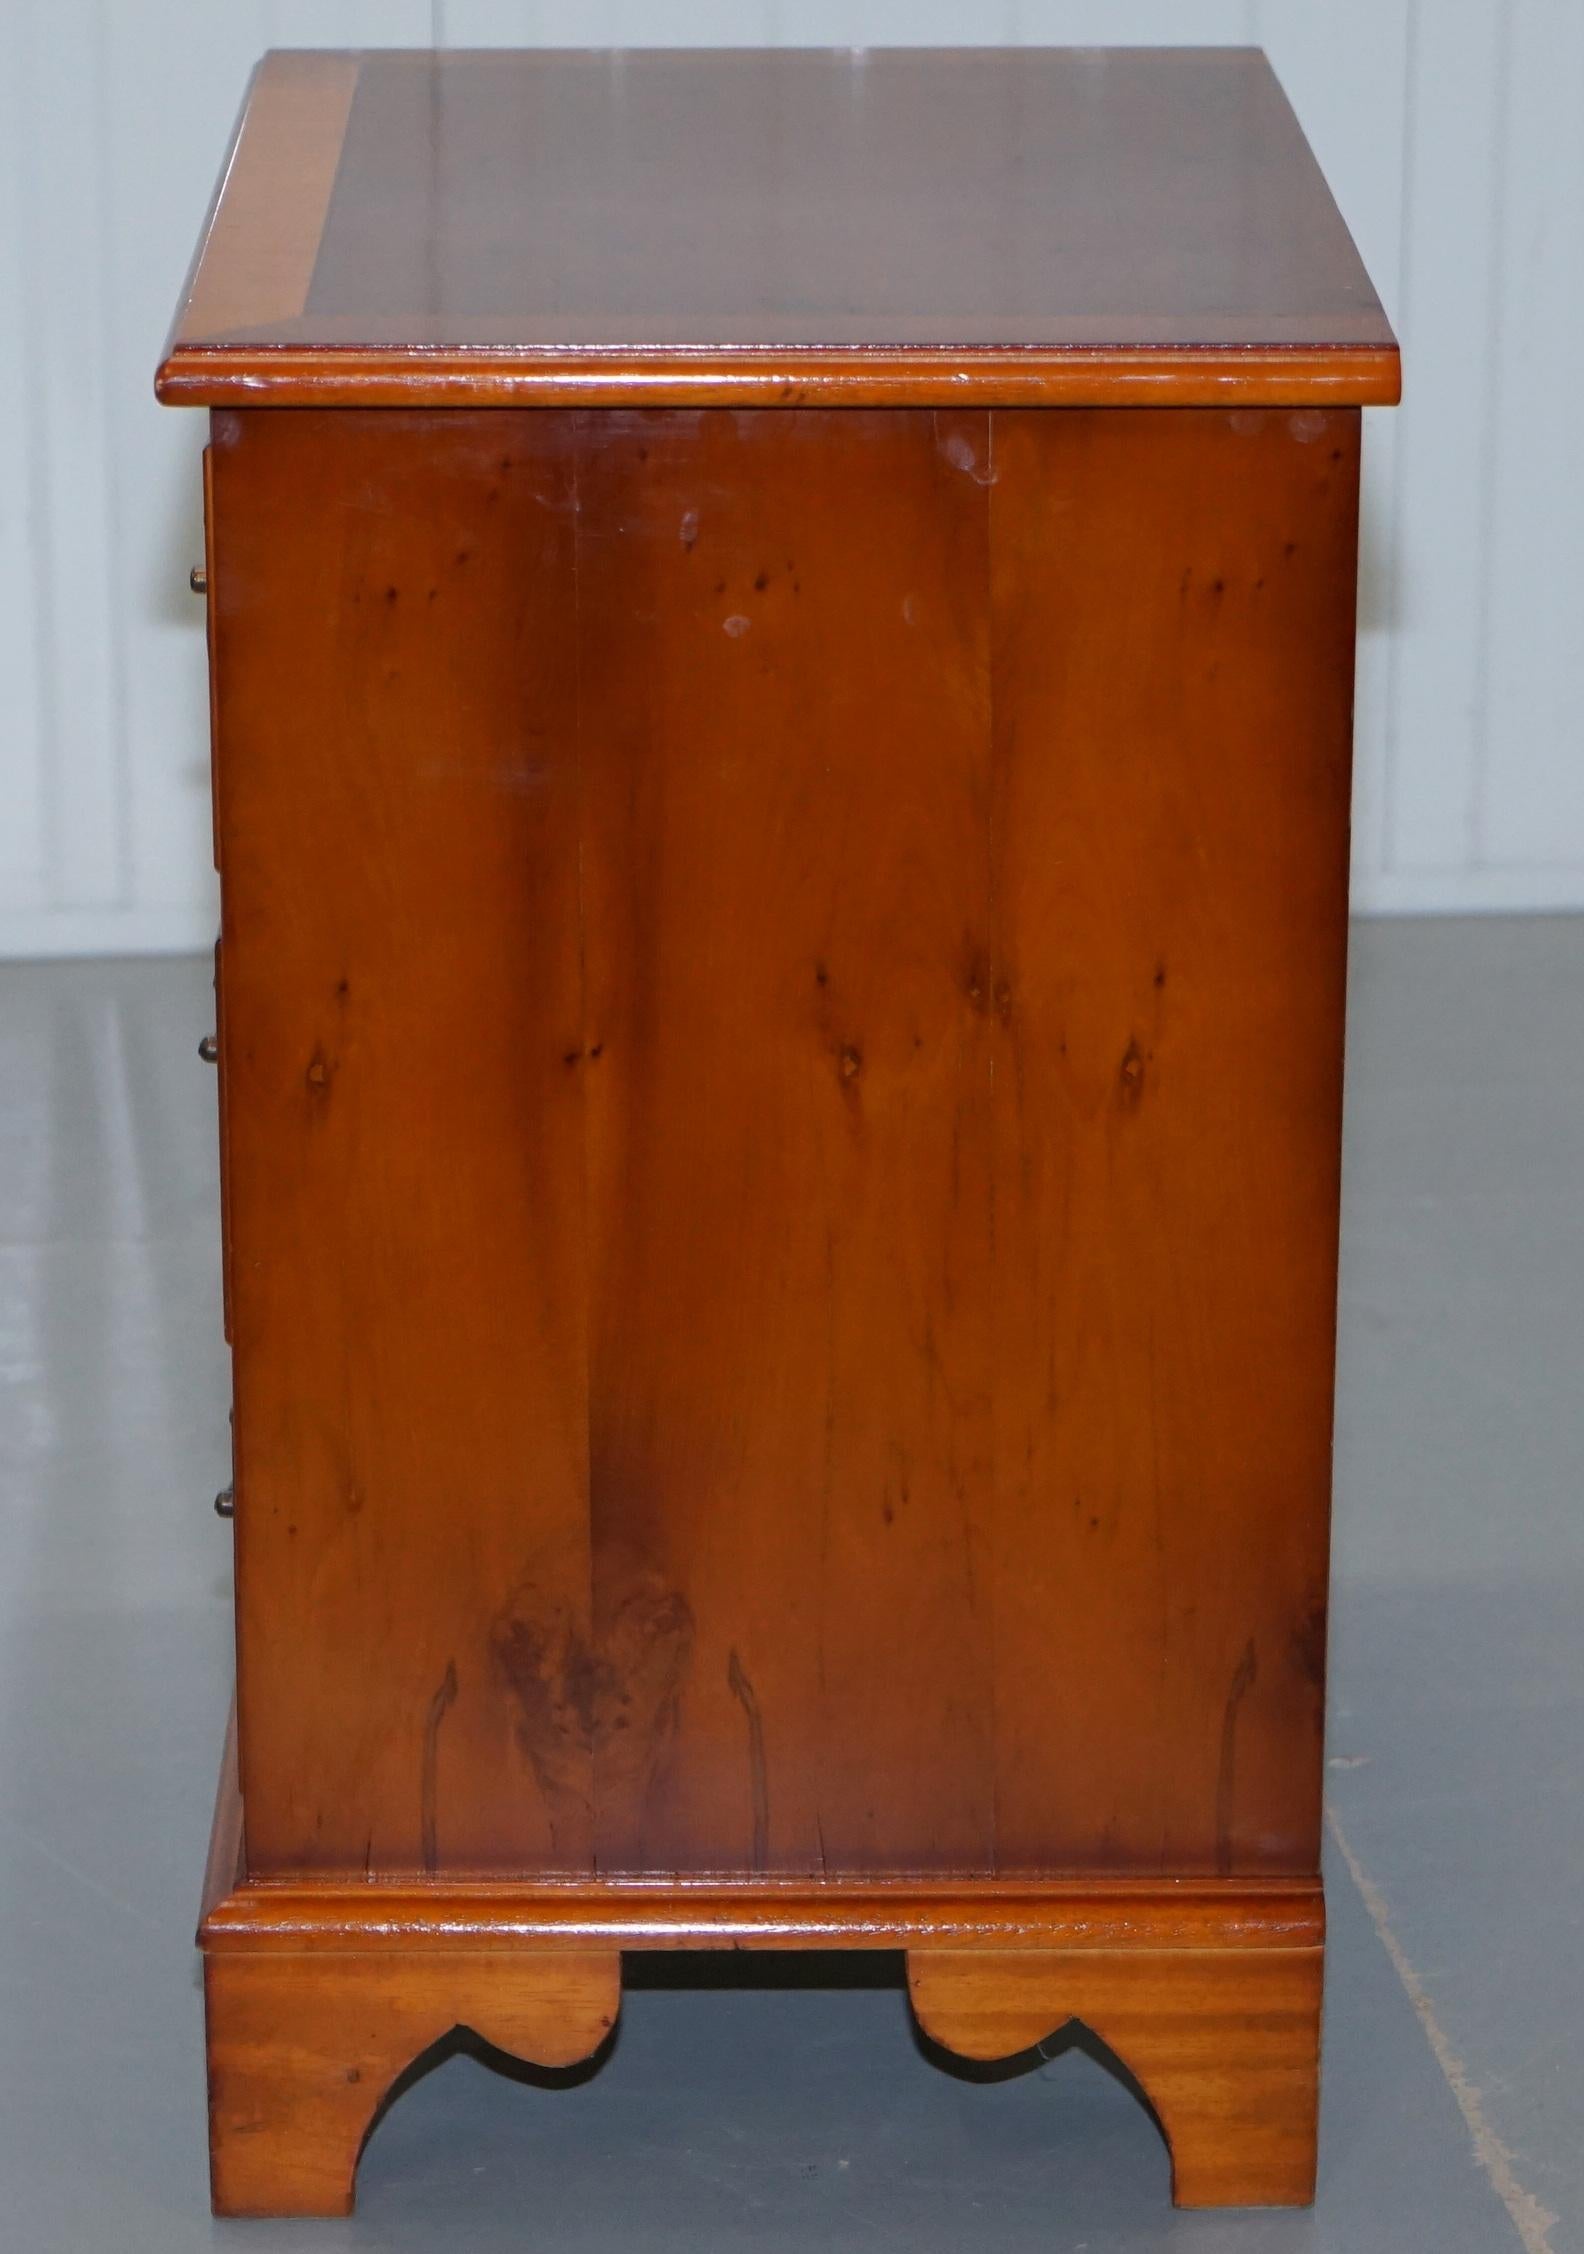 Small Burr Yew Wood Side Table Sized Chest of Drawers Great for Office Home Bed 6